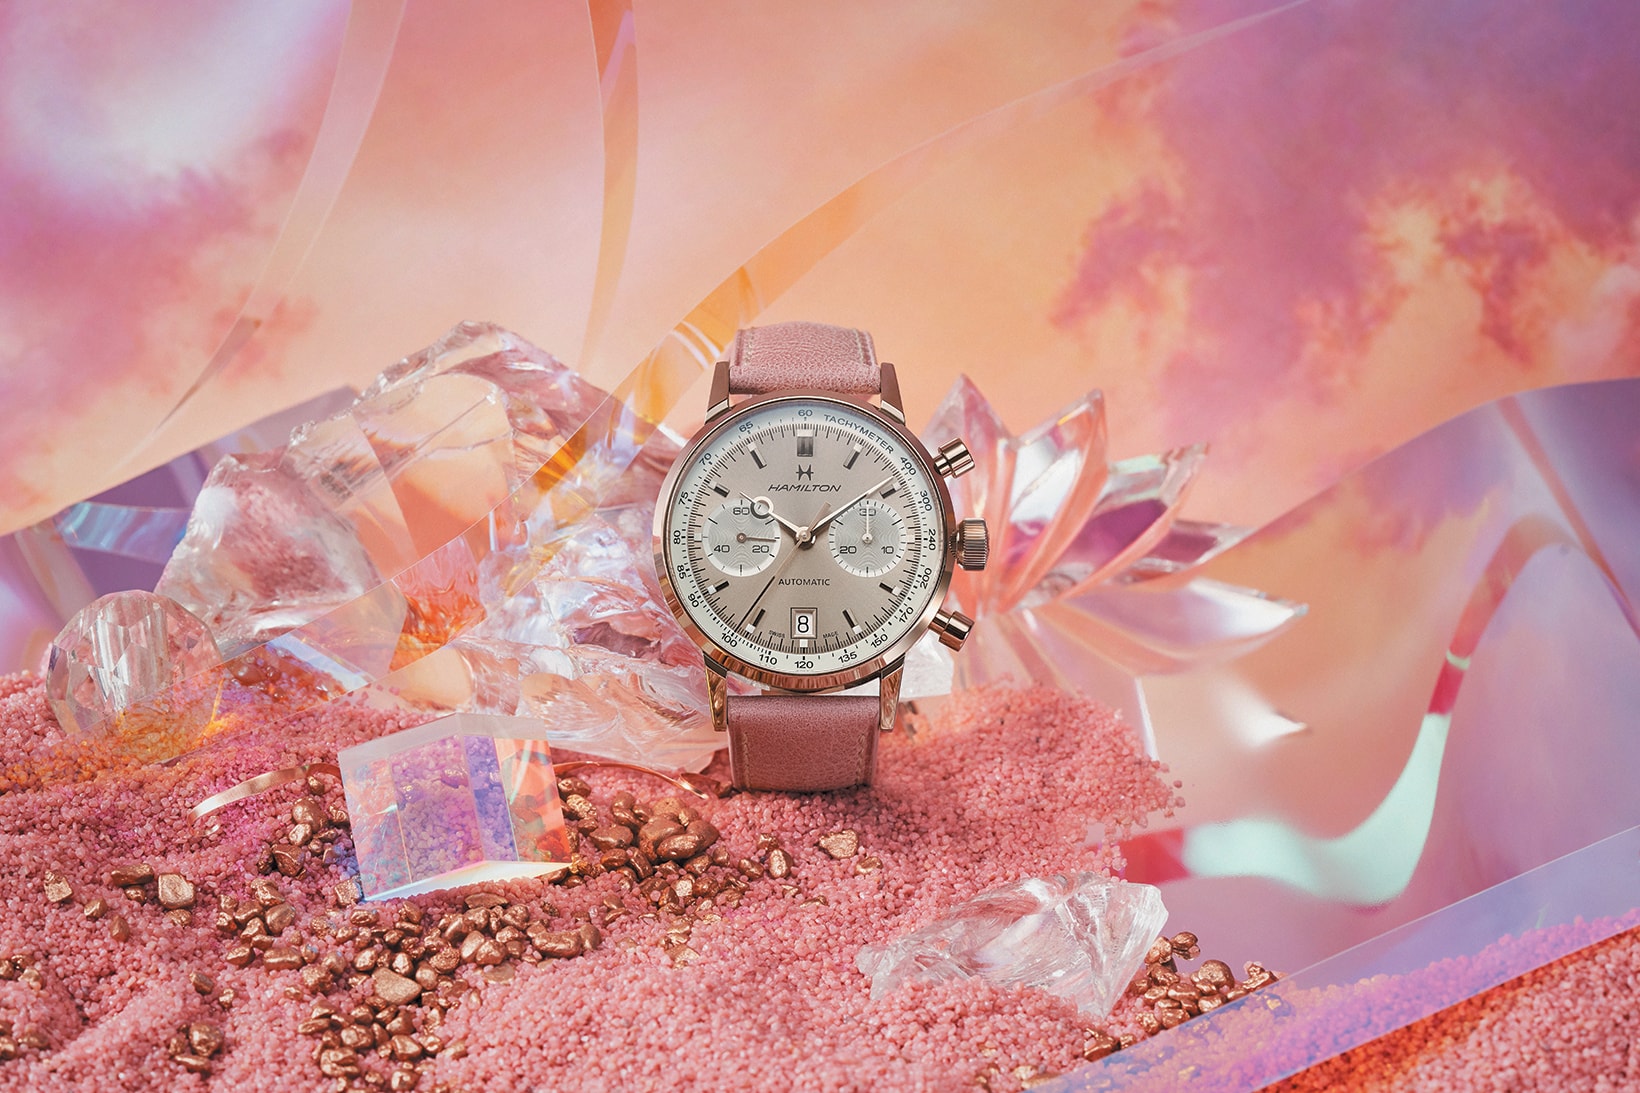 Hamilton Janie Bryant Watches Timepieces Collaboration Collection Pink